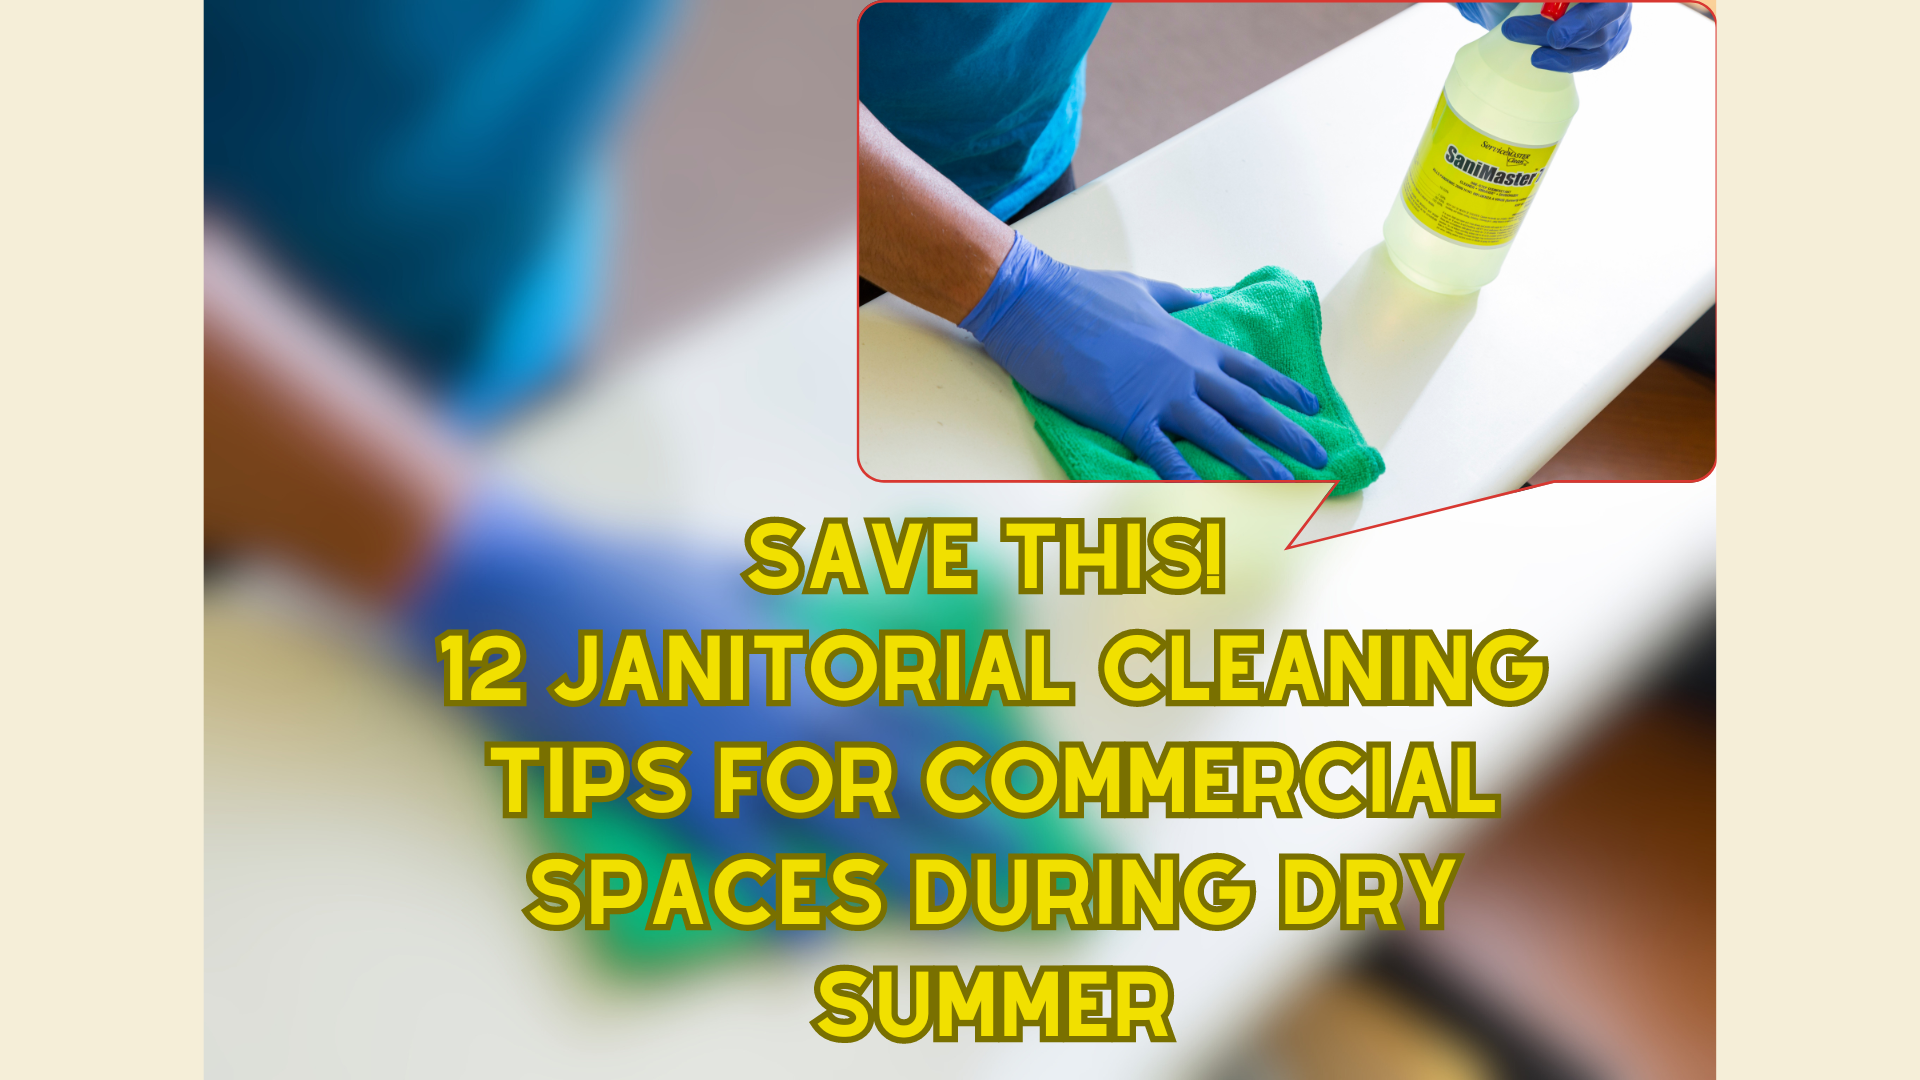 Janitorial Cleaning Tips for Commercial Spaces